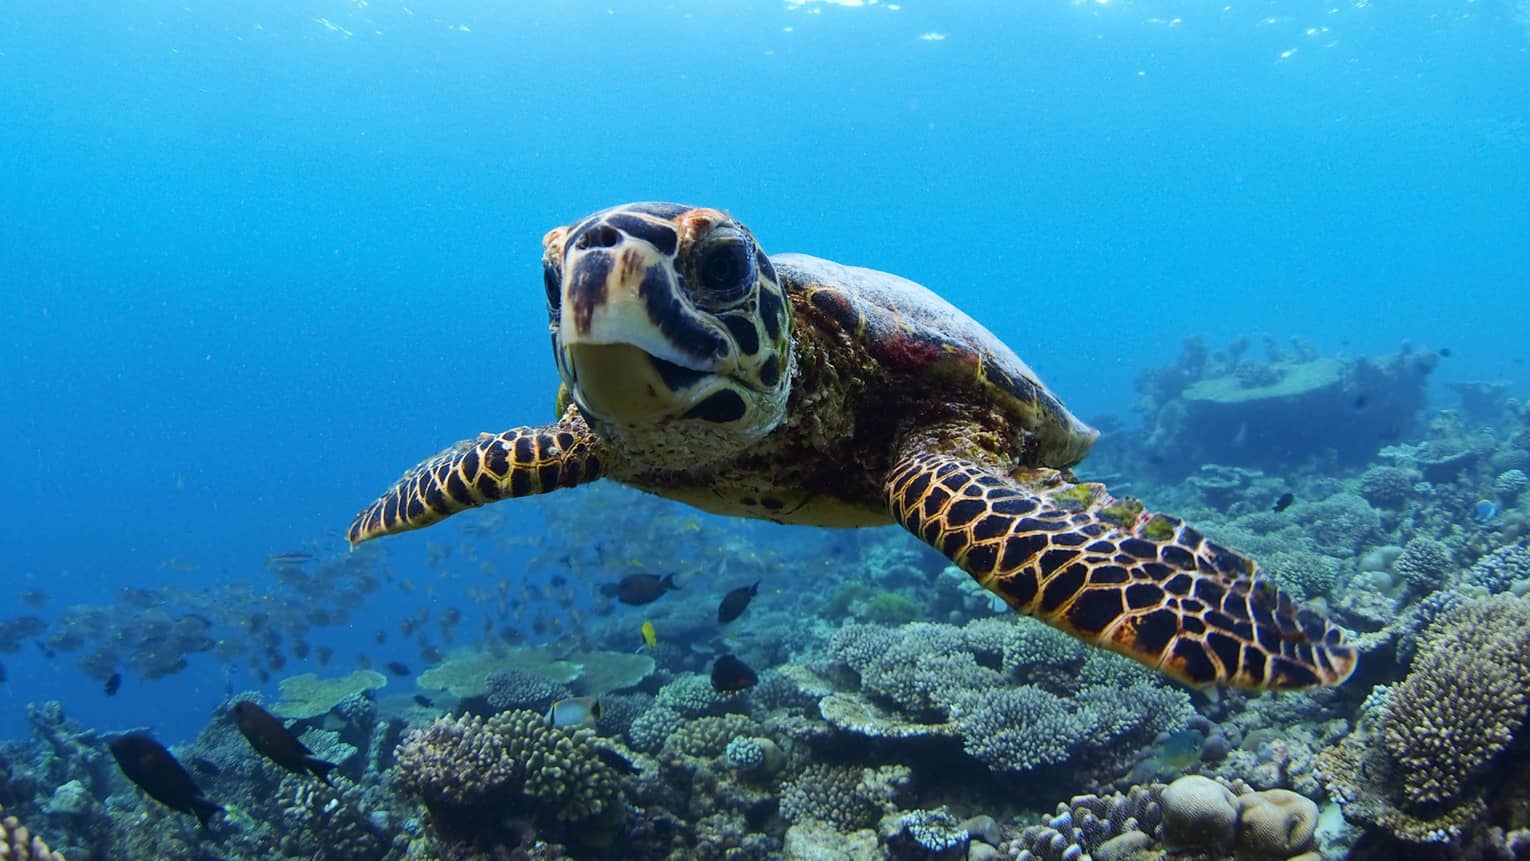 Close-up view of turtle with beak-like mouth and mottled front flippers, swimming above coral, fish below and in background.